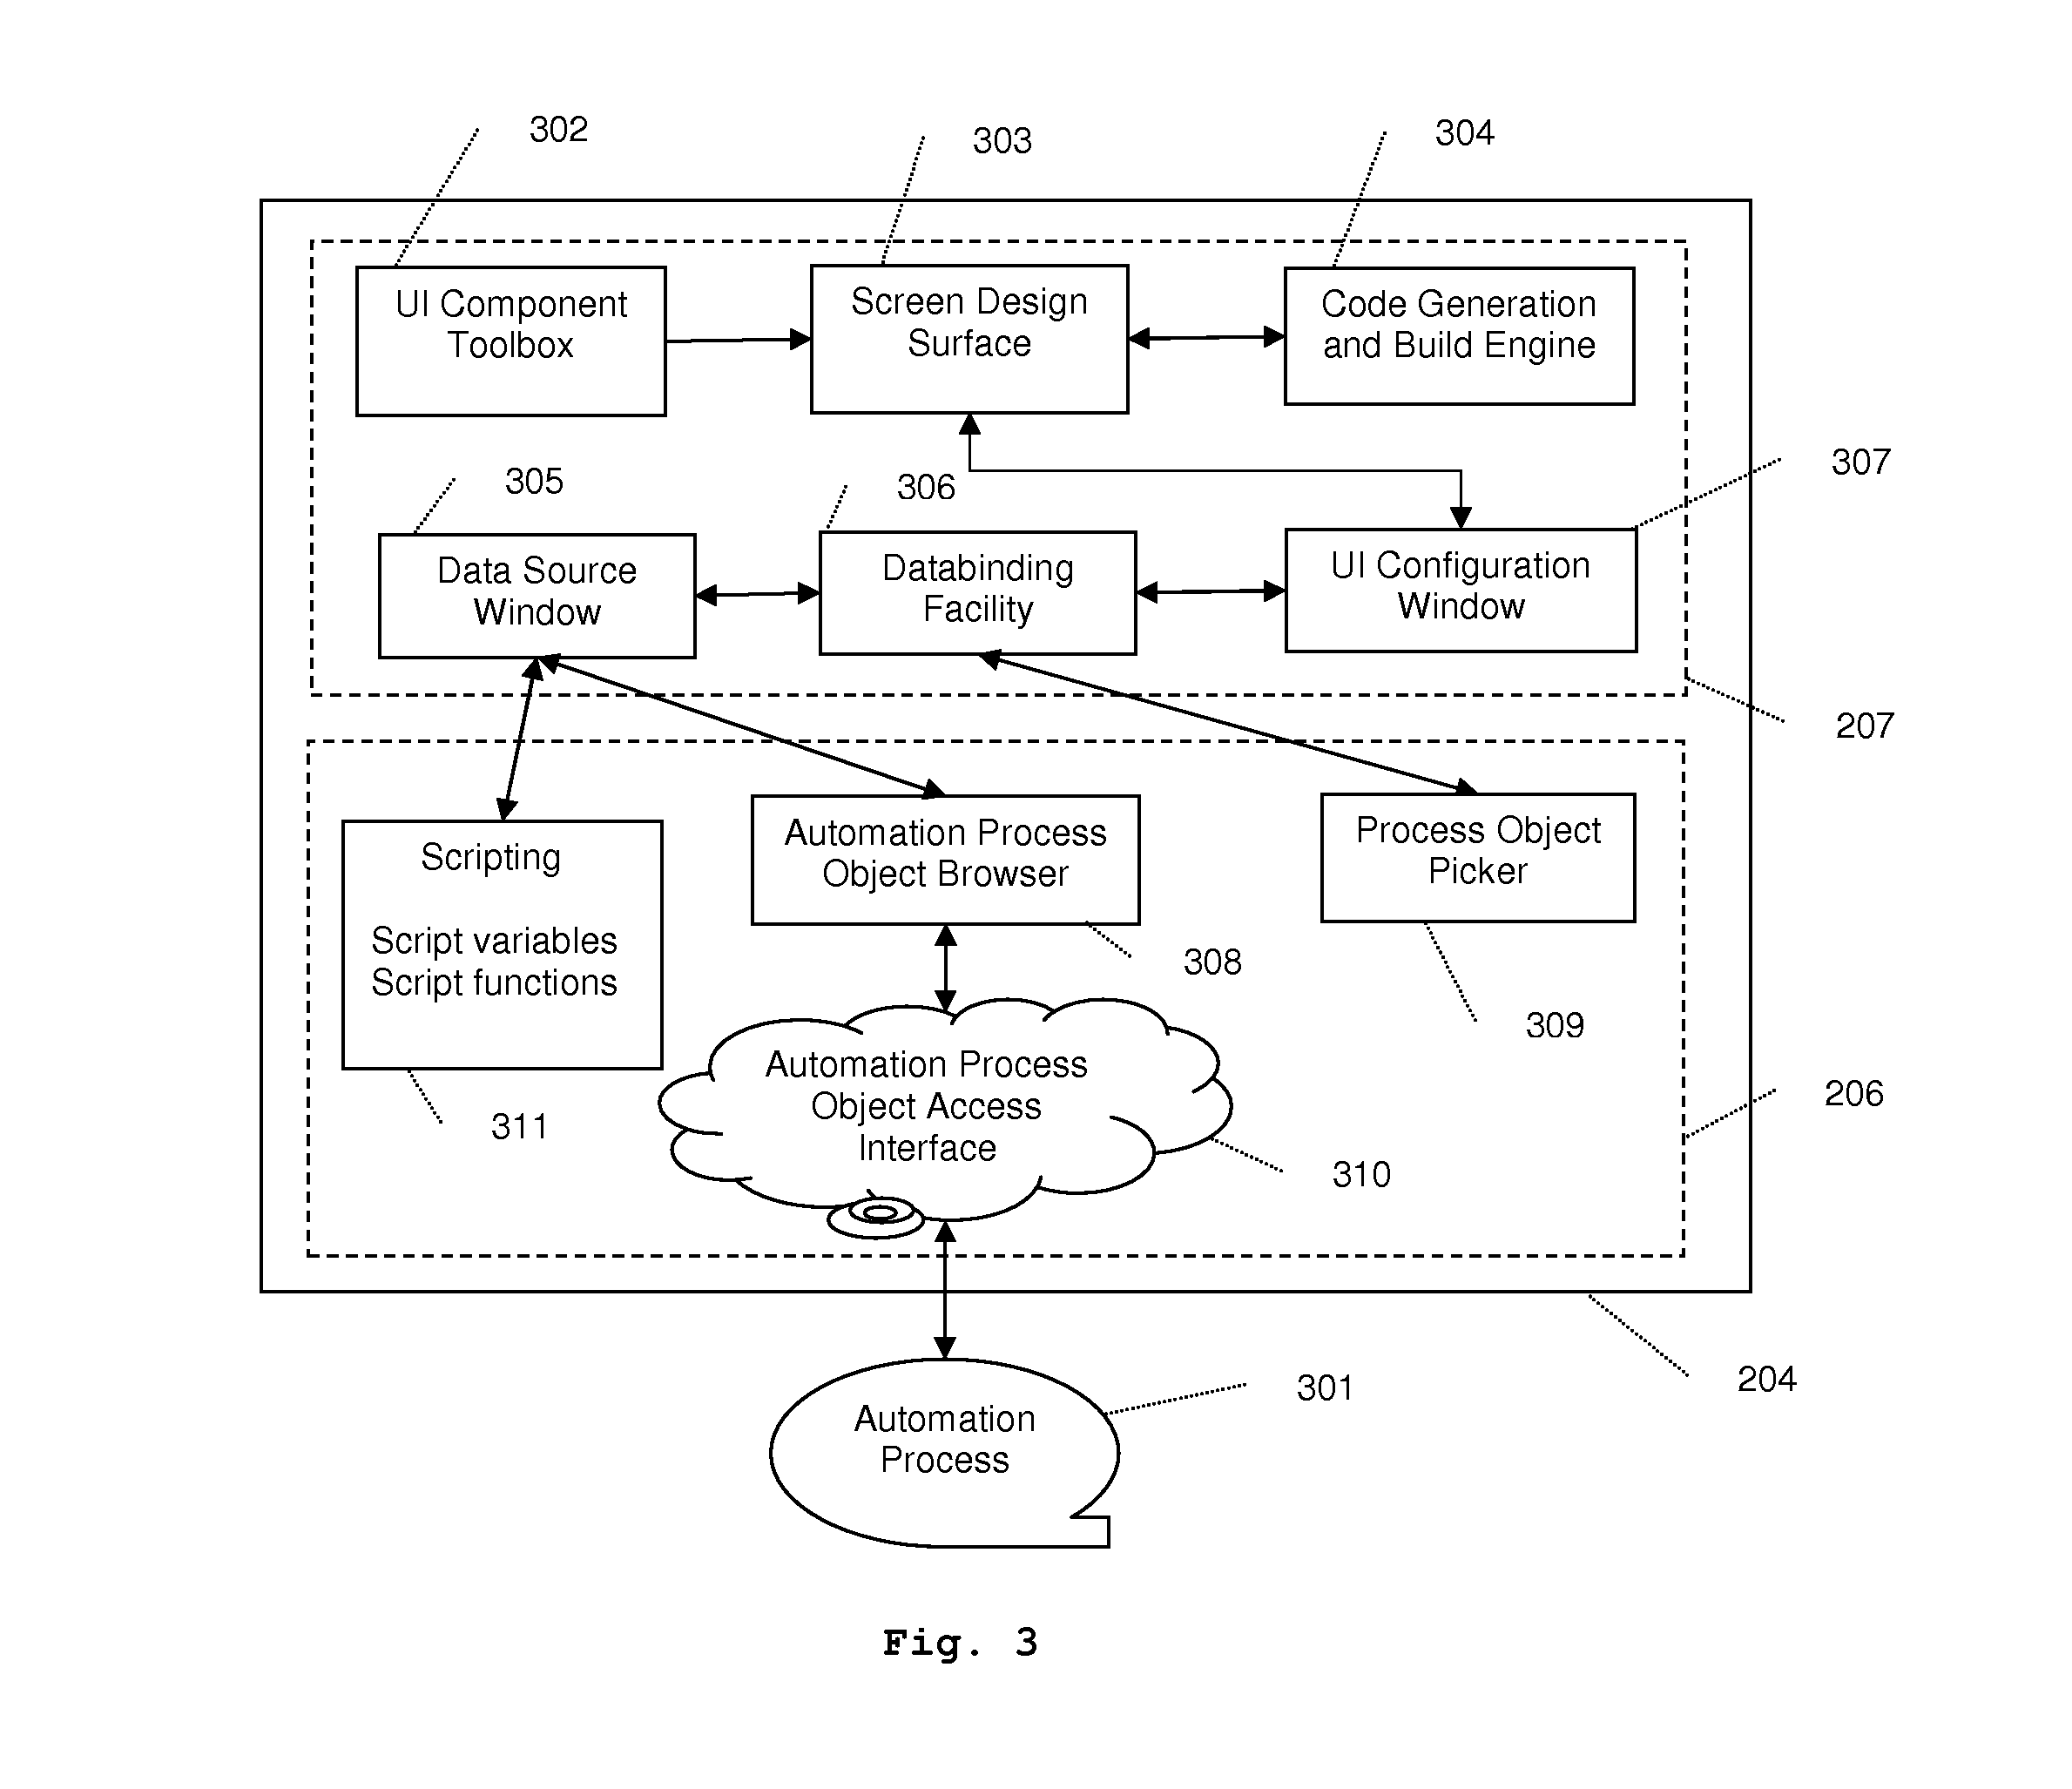 Method And System For Creating HMI Applications For An Automation Process